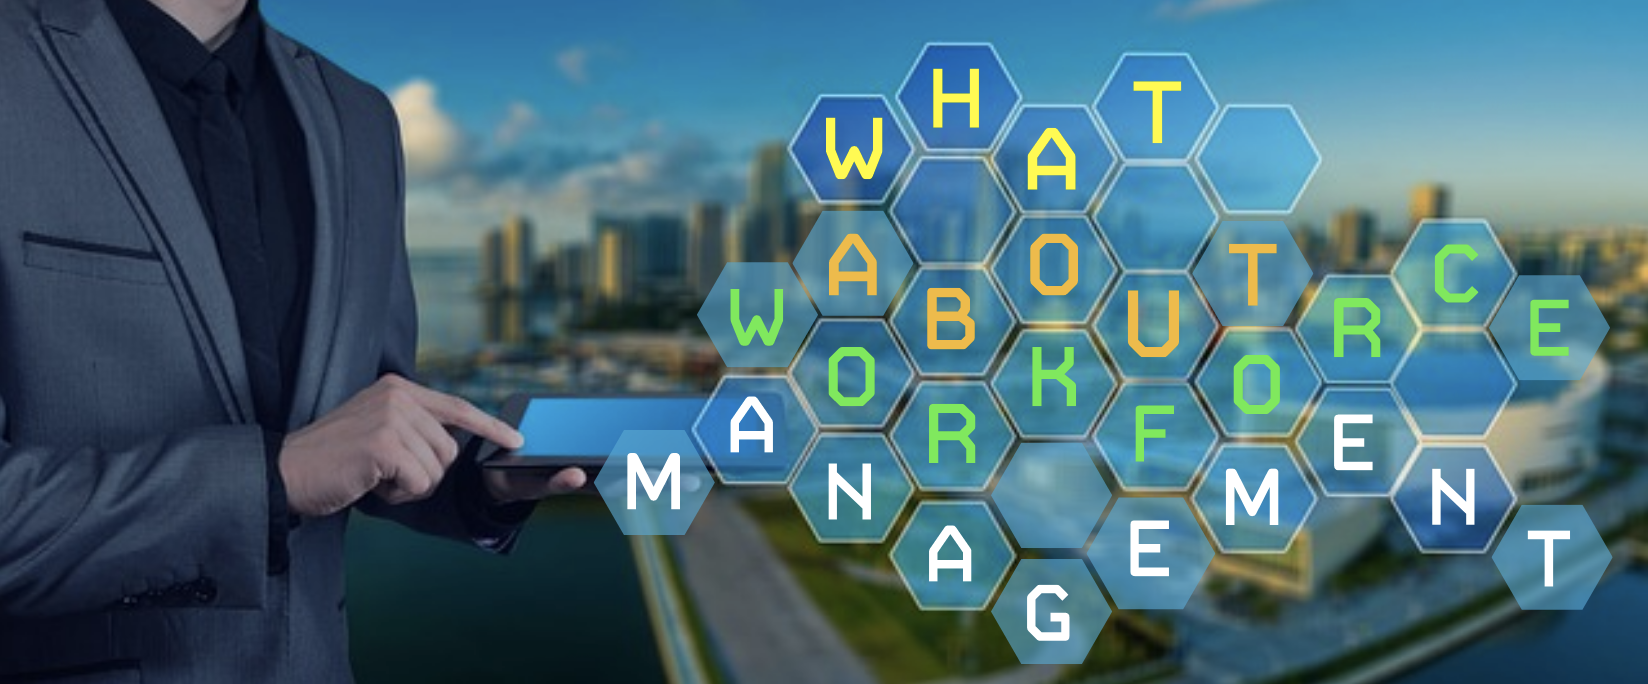  ChatGPT - What about workforce management?